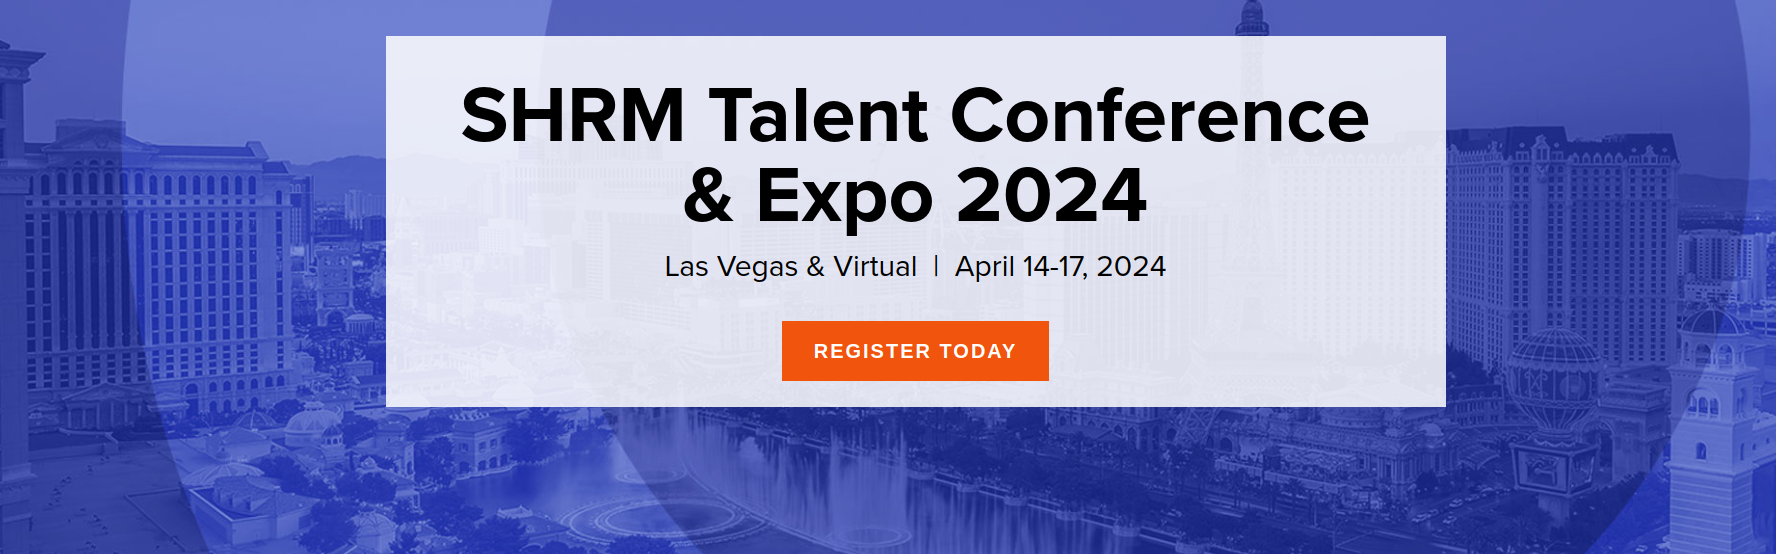 SHRM Talent Conference & Expo 2024